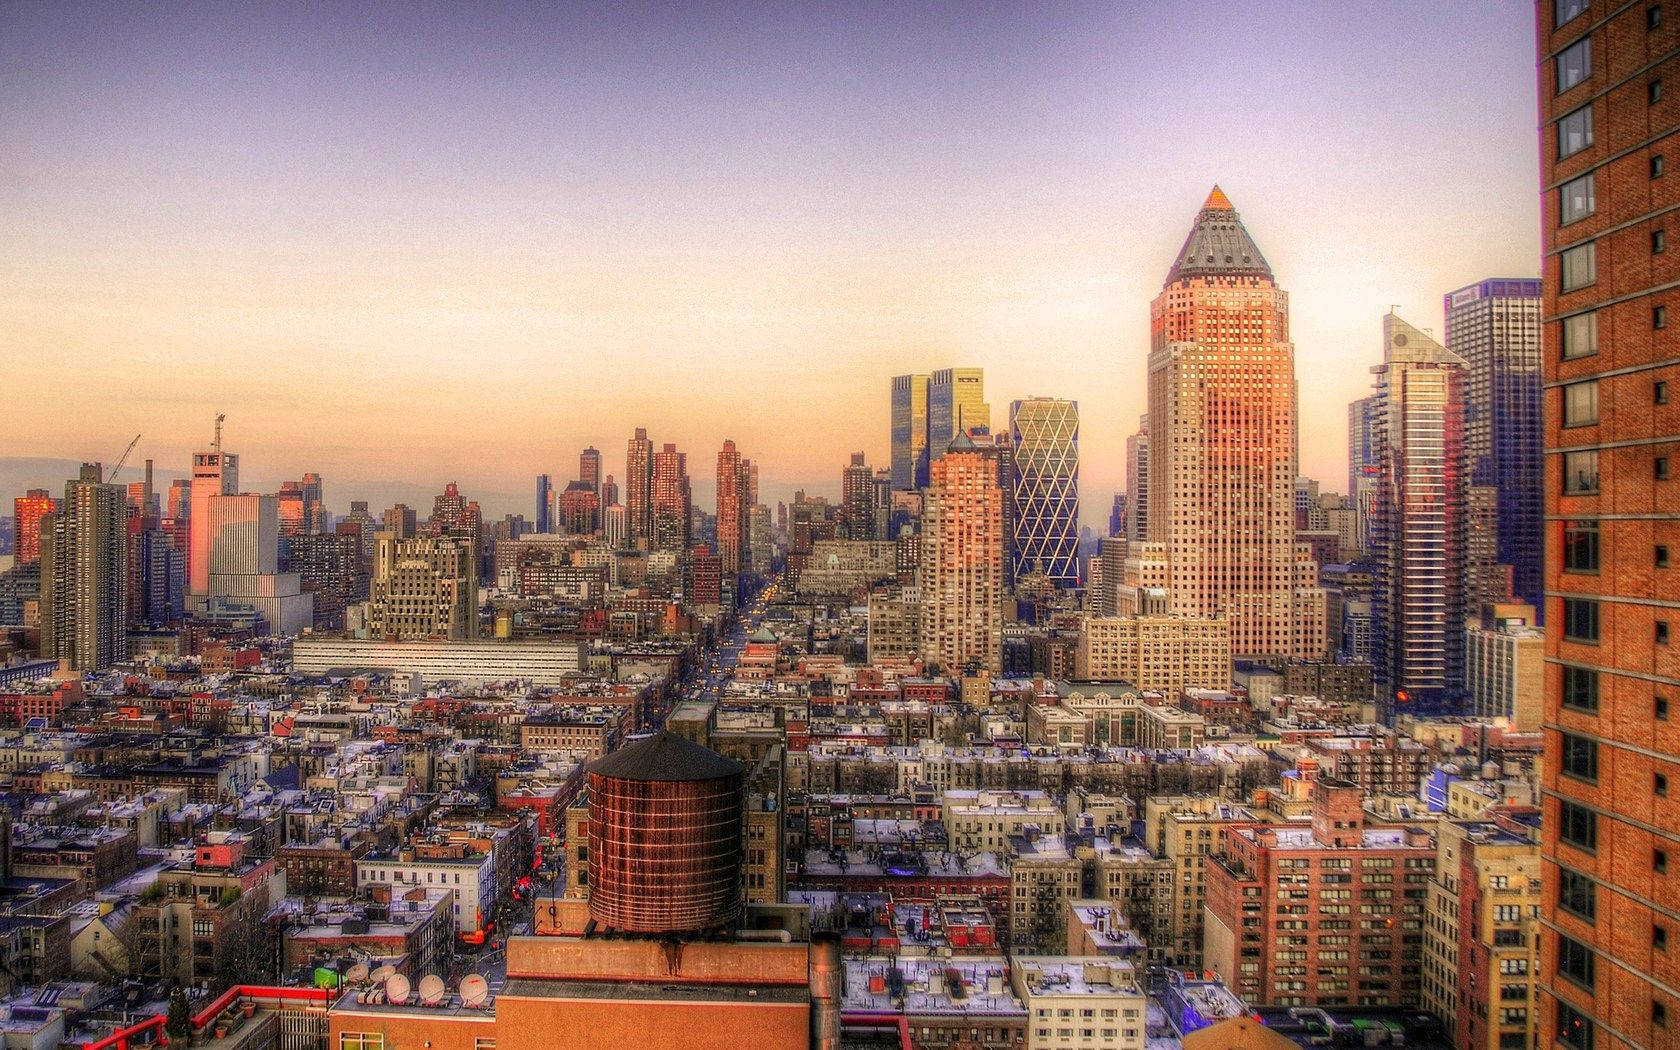 New York City Buildings At Sunset Drone Shot Wallpaper